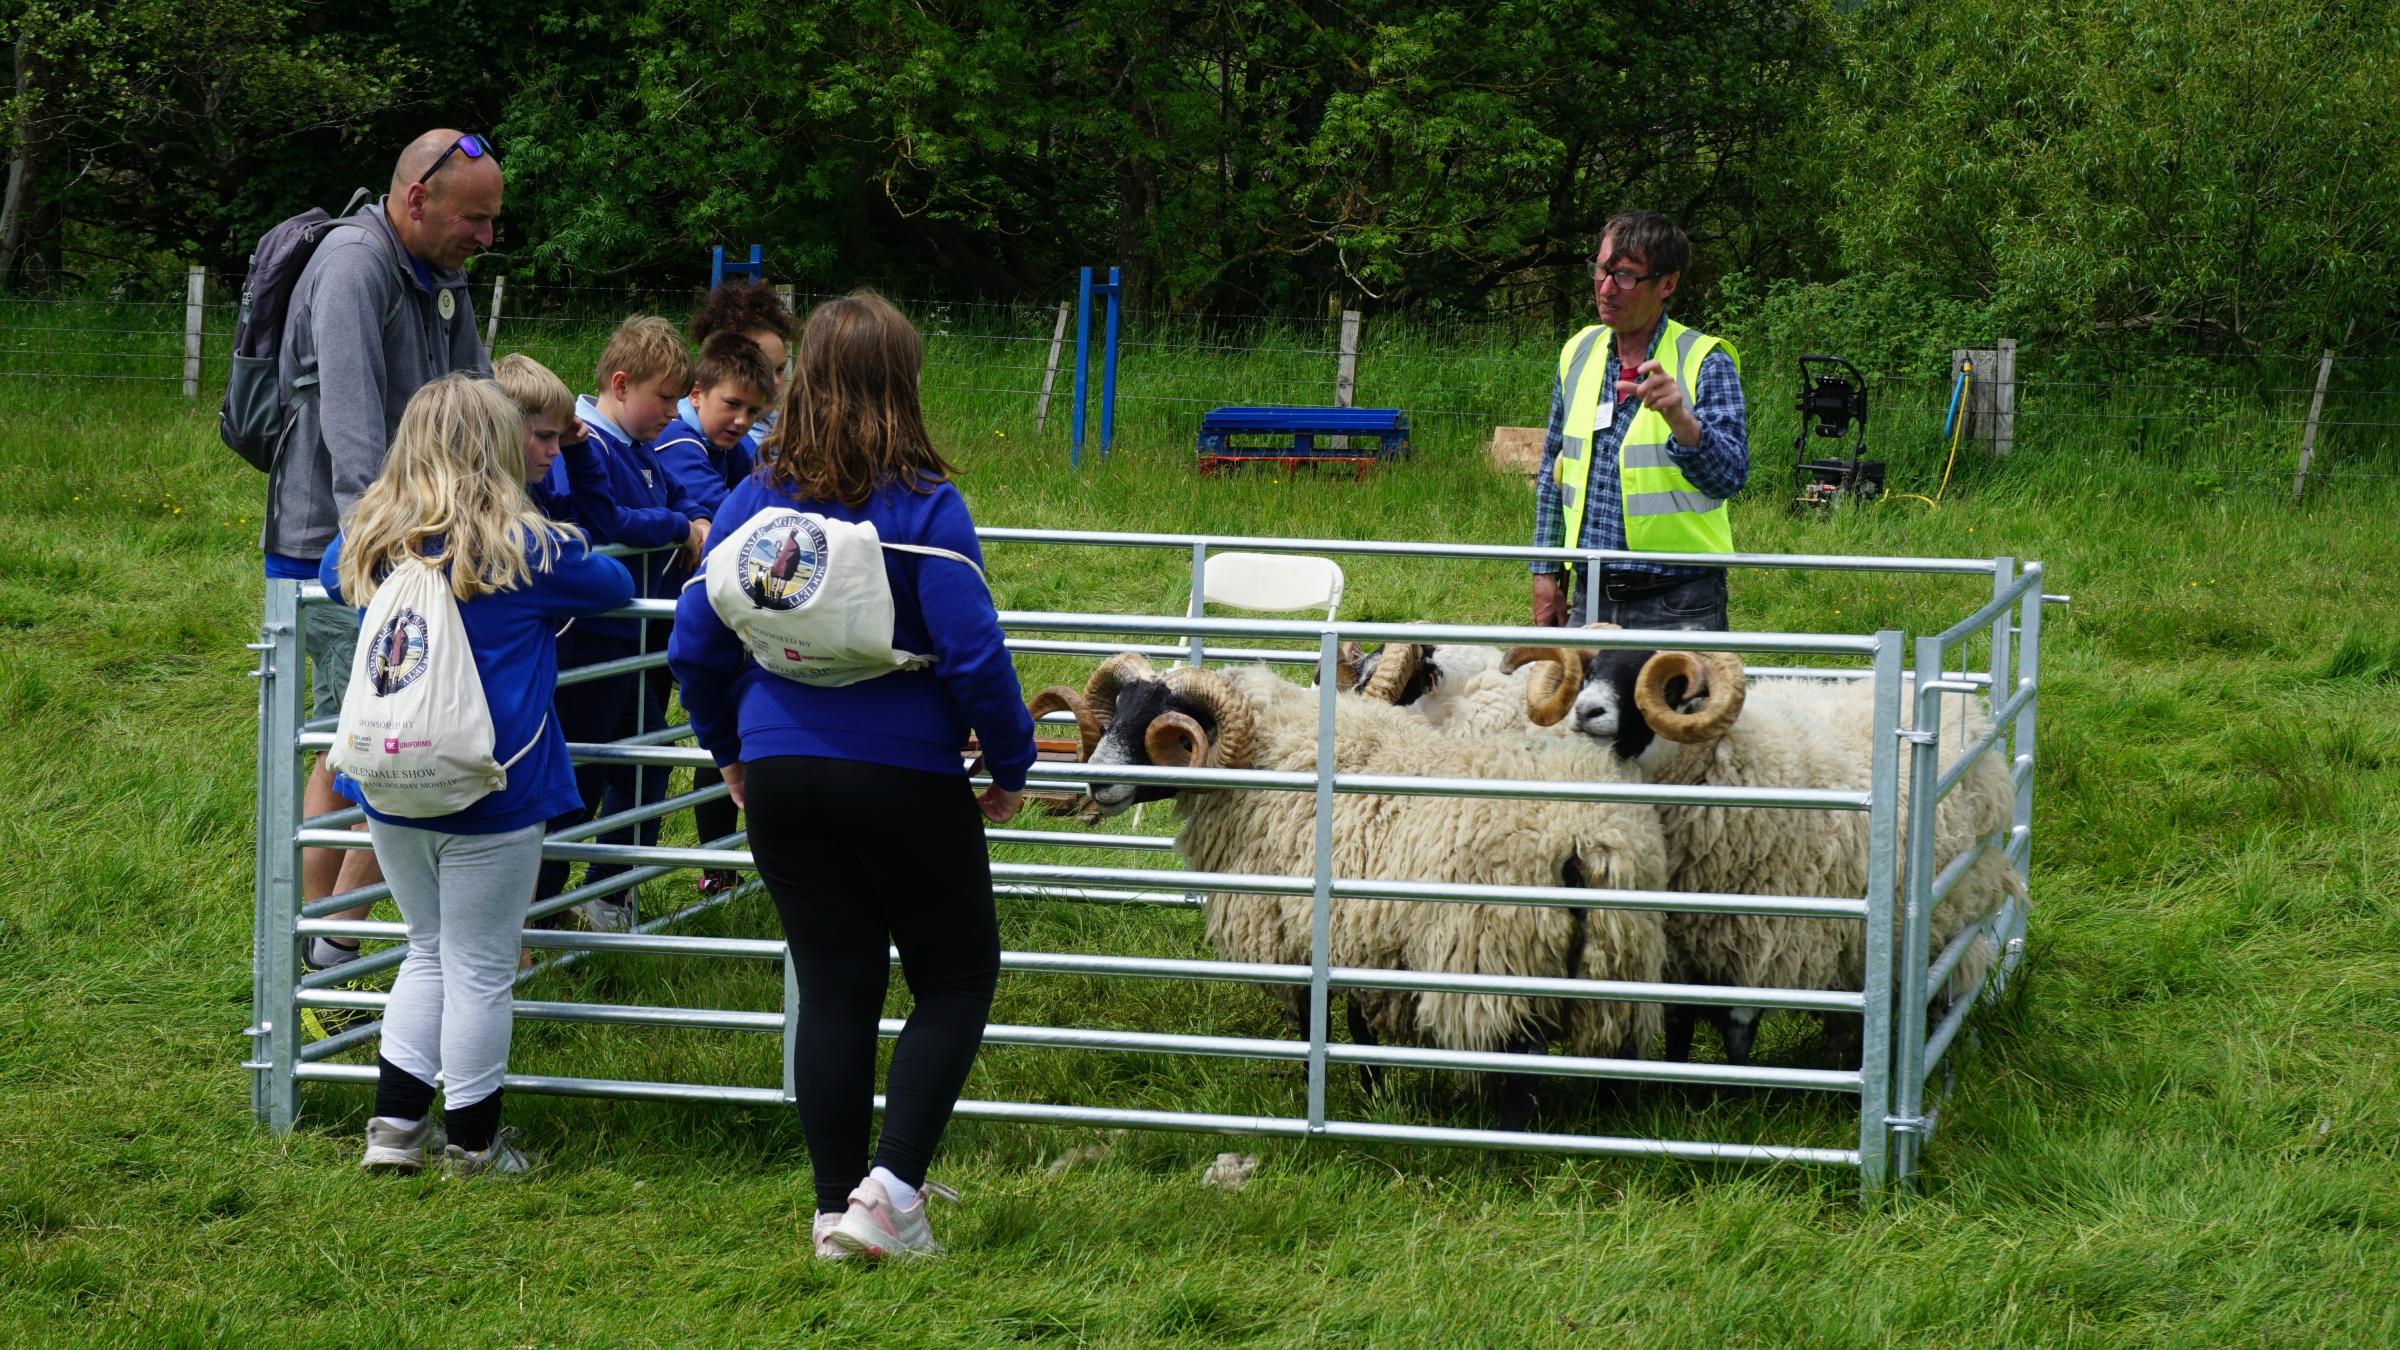 Children learn about sheep at the Childrens Countryside Day